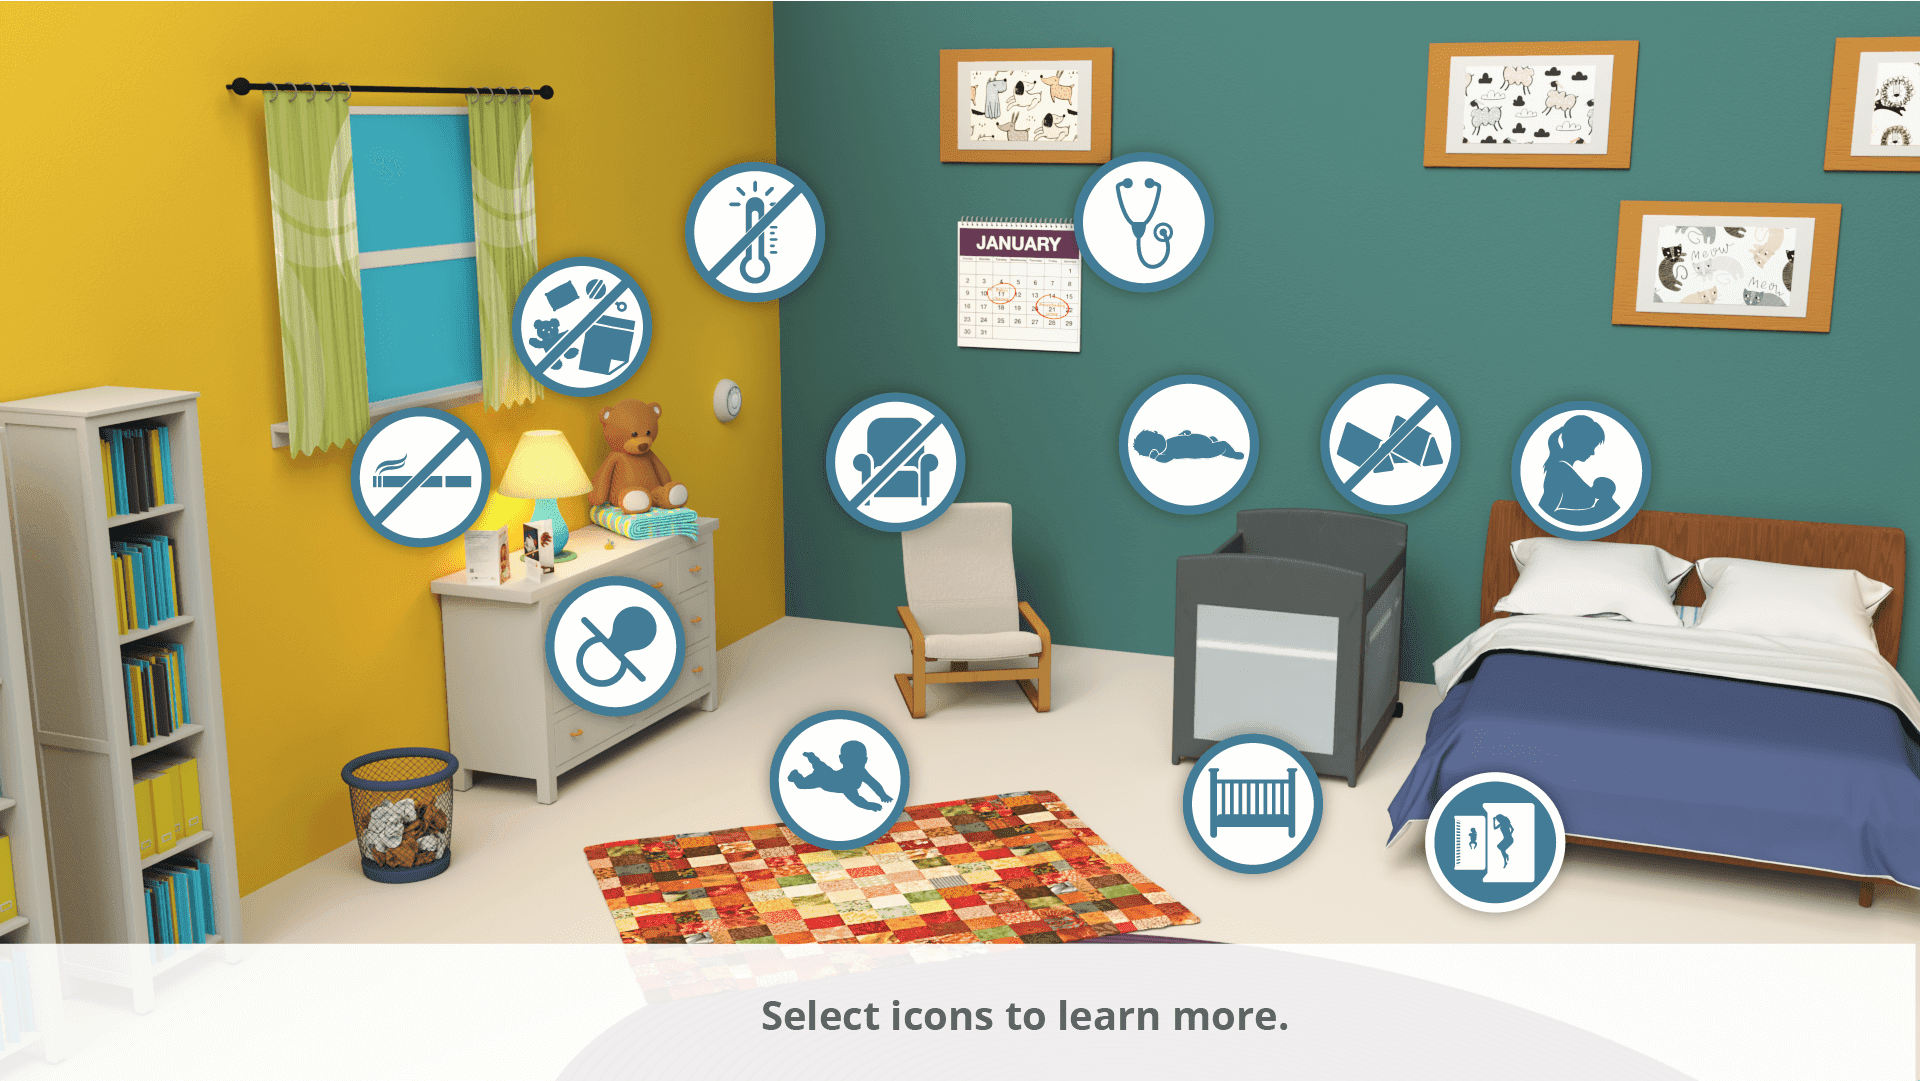 The interactive room shows an adult bedroom with icons showing different safe infant sleep recommendations.